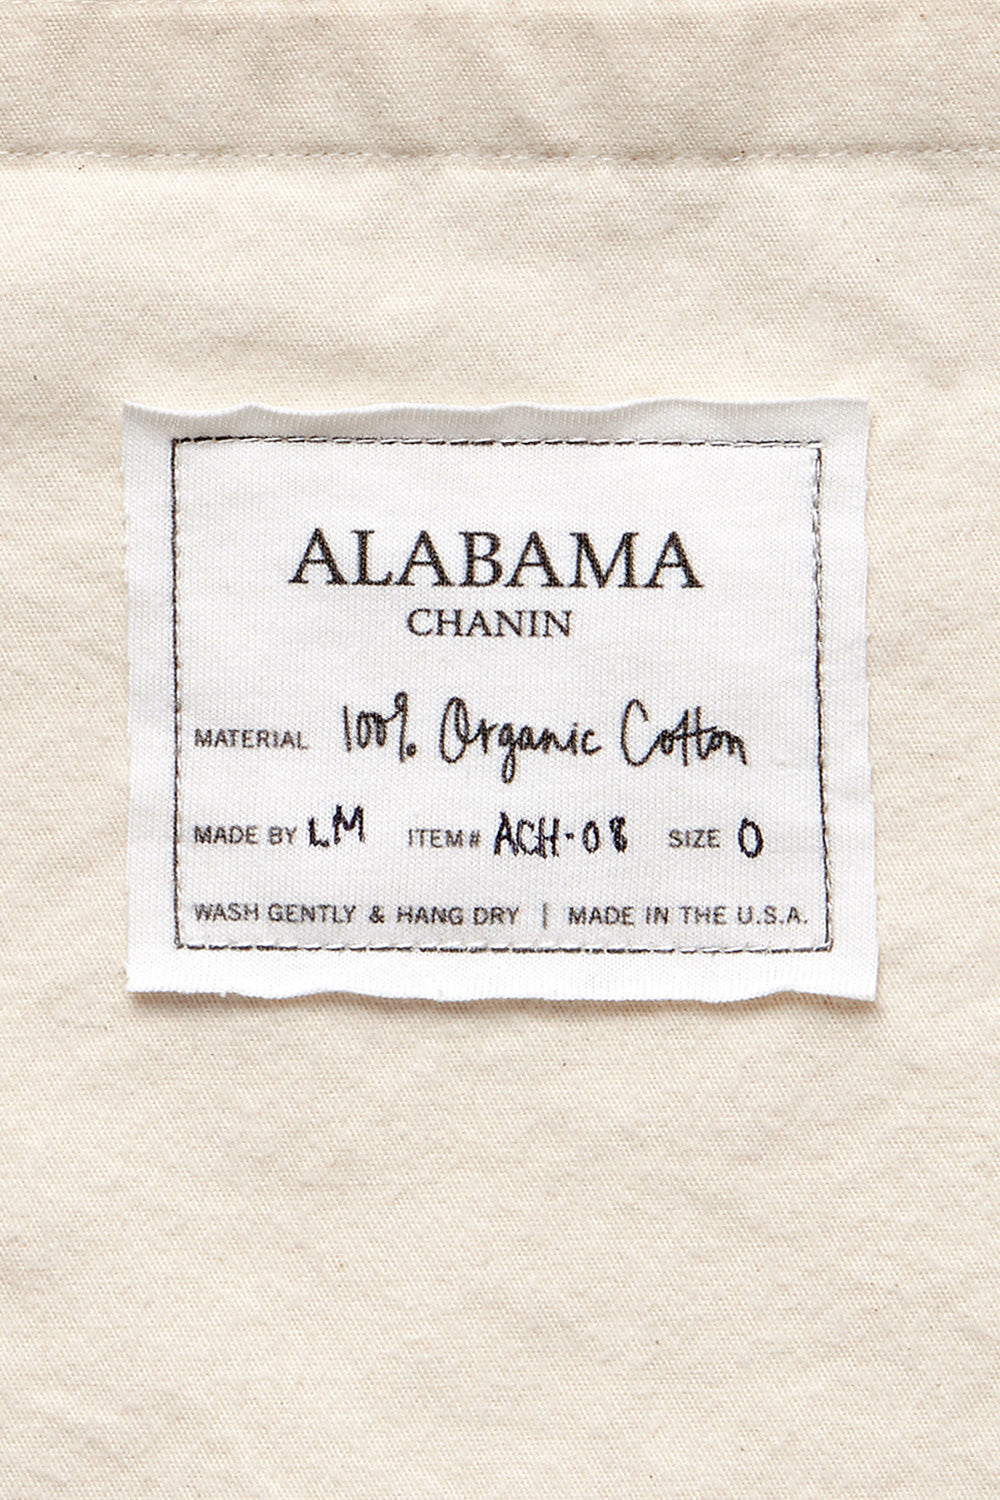 Close-up view of Alabama Chanin label on the Flannel Tote Bag.